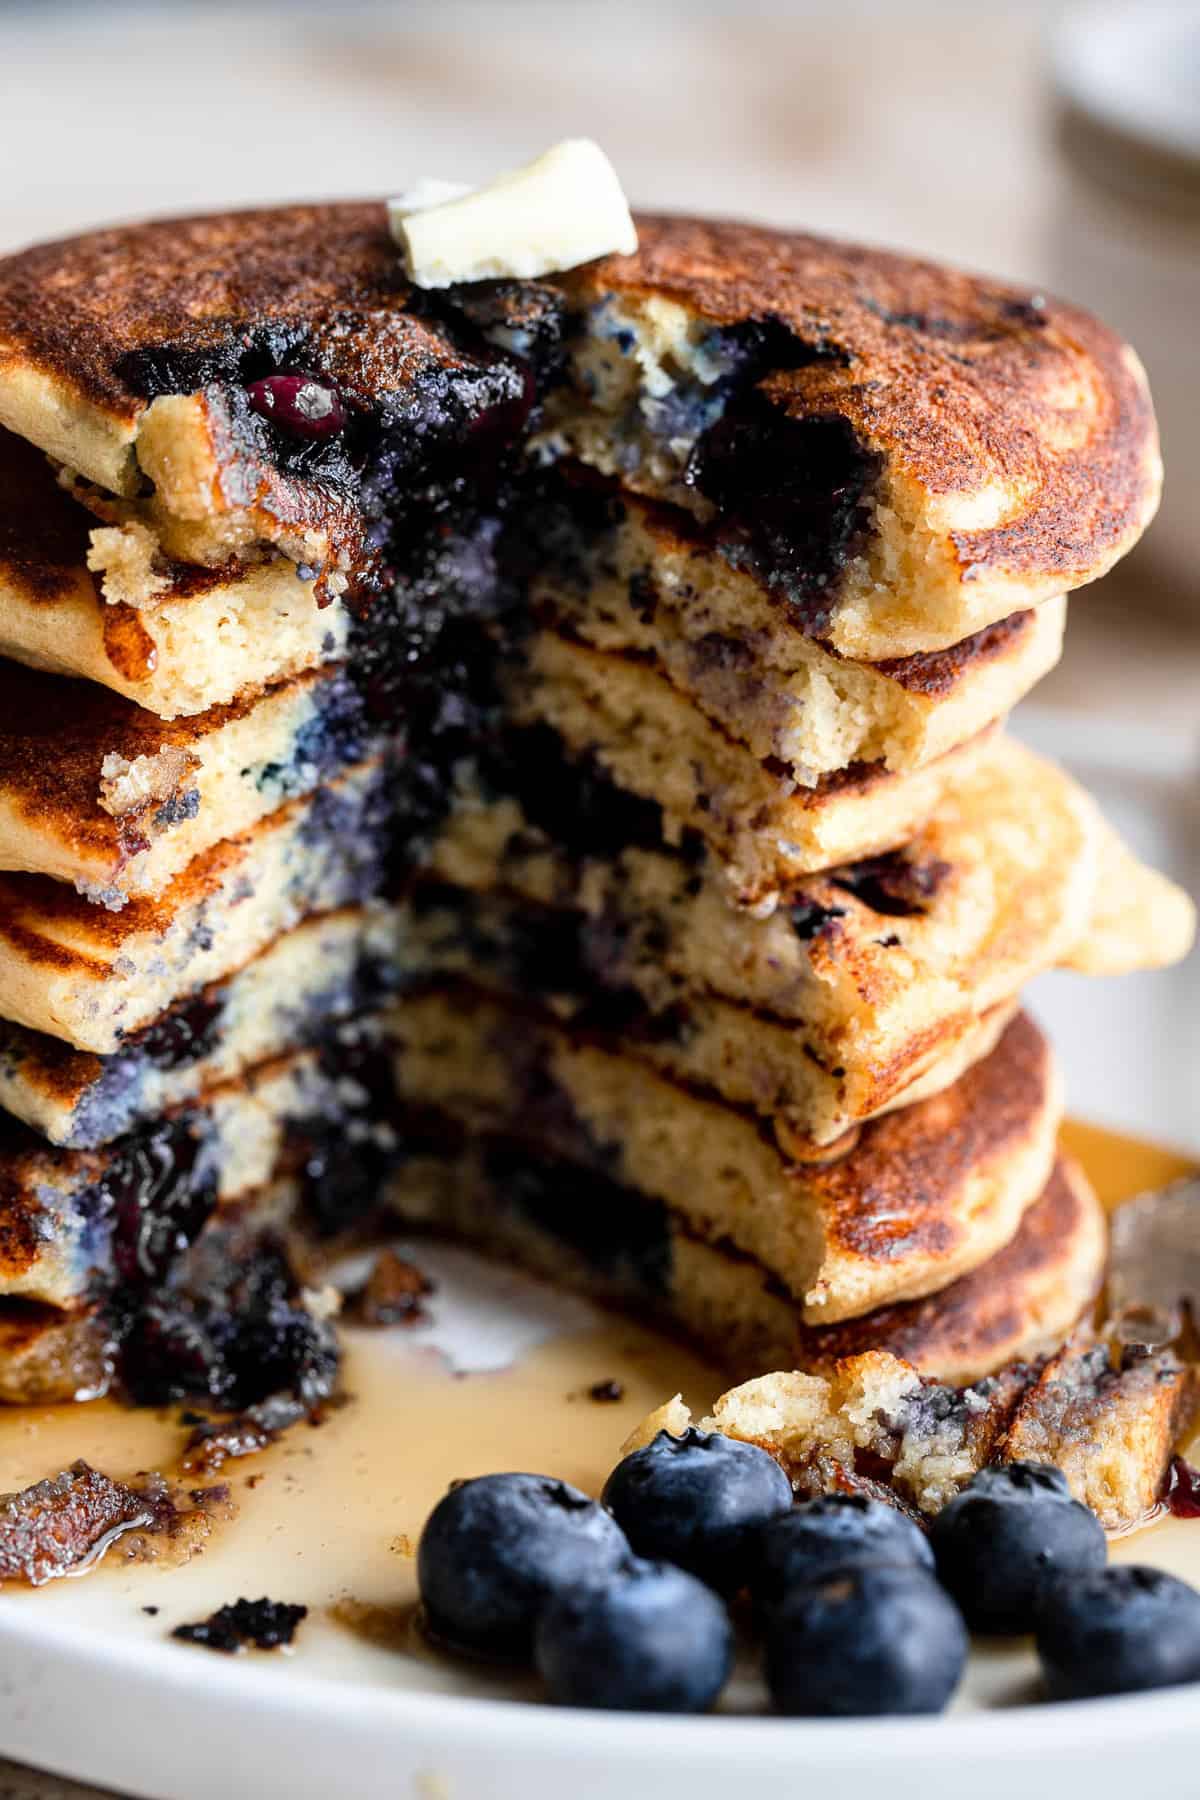 Best blueberry pancake recipe picture of inside of pancakes